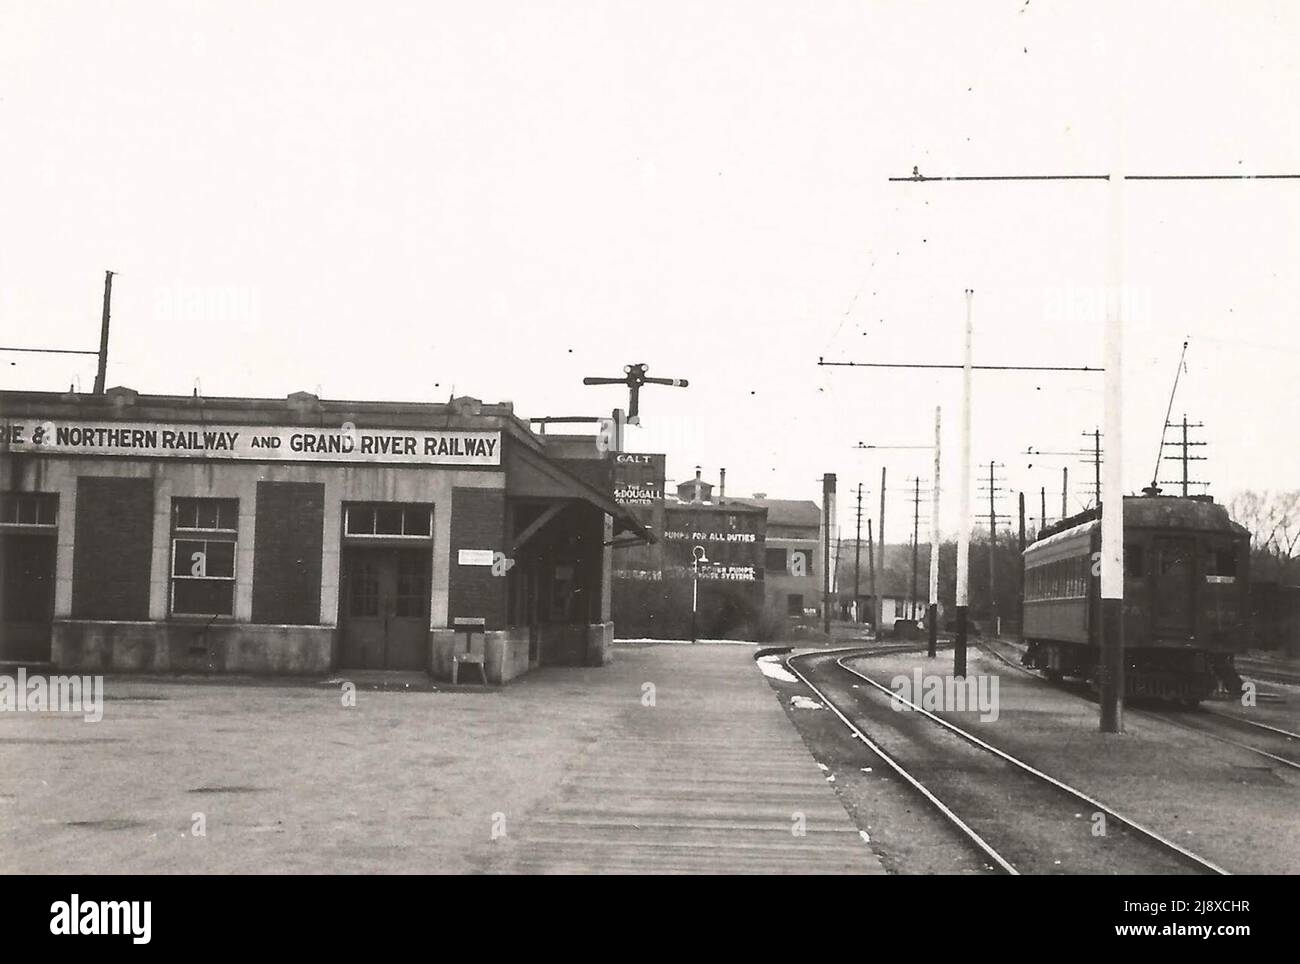 Station & car at Galt (1 mi. from CPR station)  This photo  taken on 20 April 1947, shows the joint Grand River Railway/Lake Erie and Northern Railway station at Main Street in Galt, Ontario, Canada, with an unidentified interurban car to the right. In the centre of the photograph, some evidence of Galt's industrial operations at the time is visible in the background Stock Photo